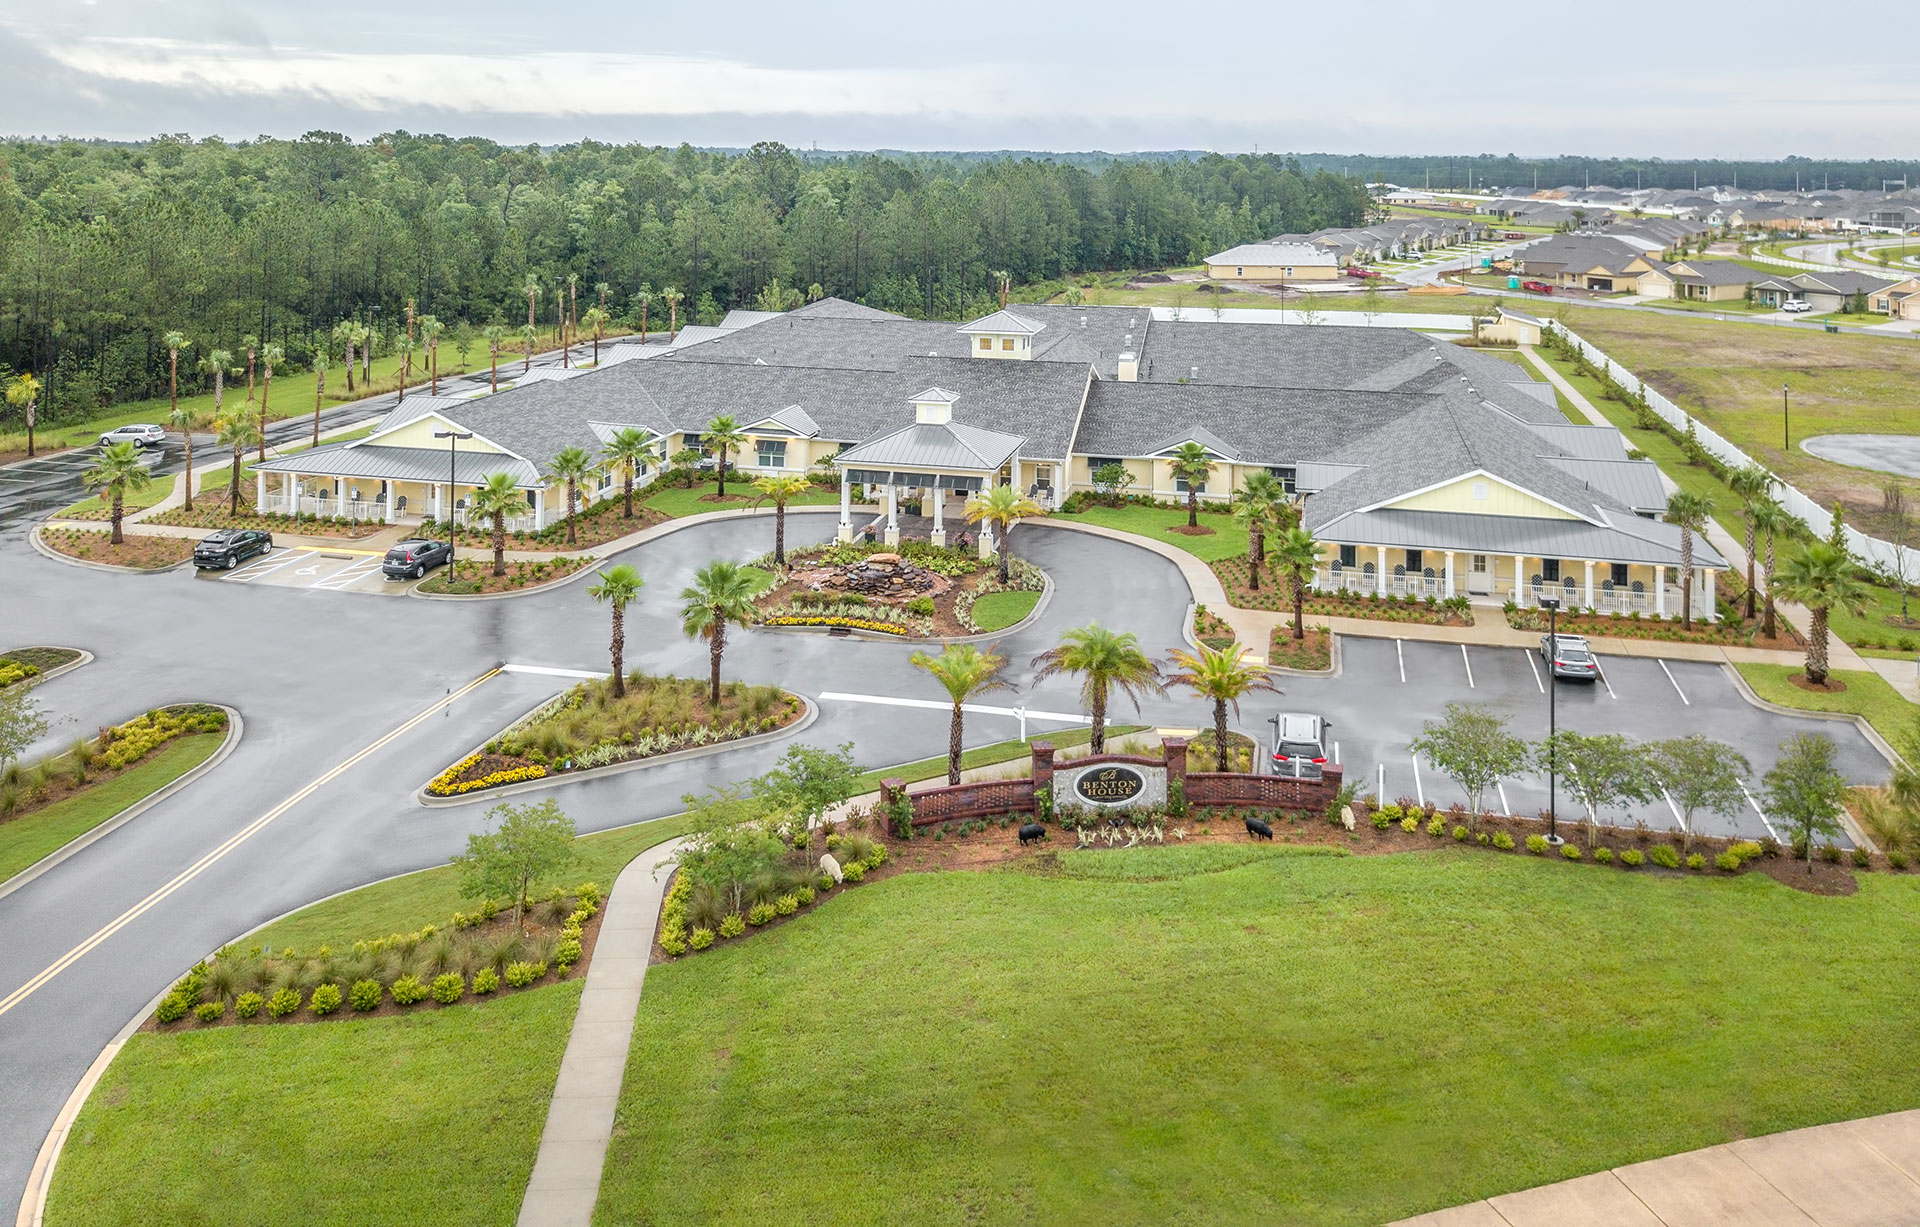 Assisted Living Communities Jacksonville